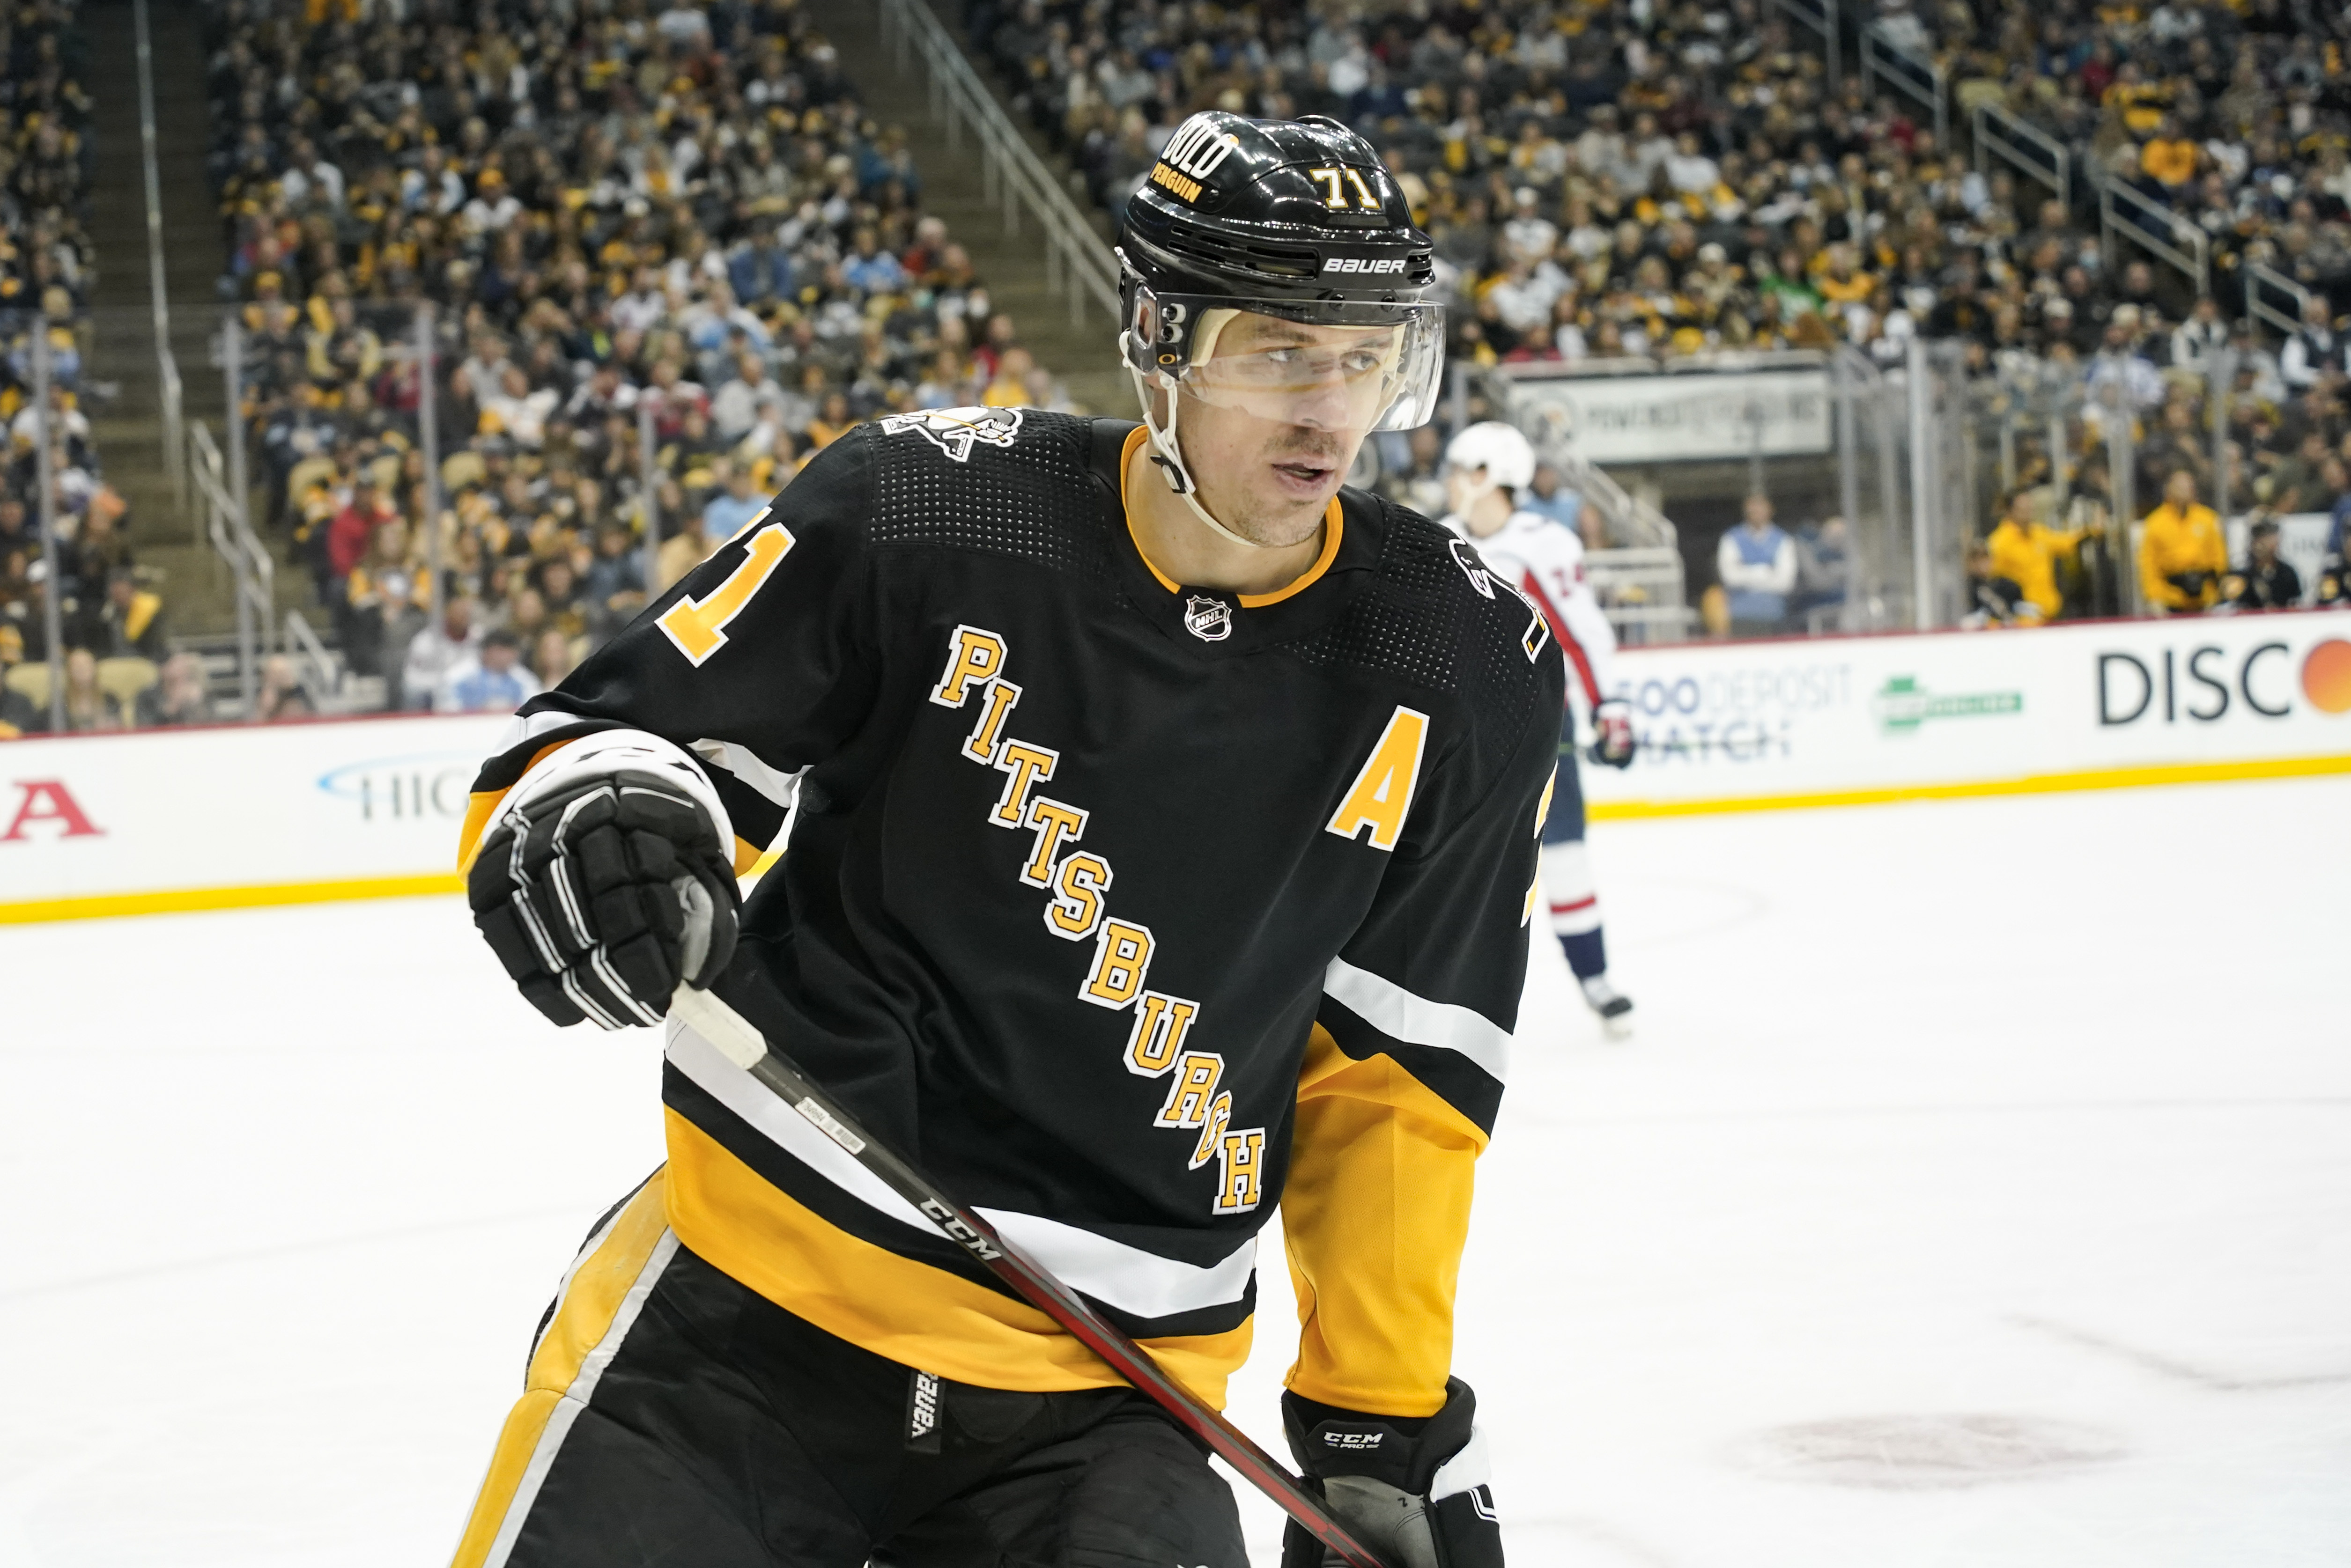 Evgeni Malkin, Penguins Agree to 4-Year Contract with $6.1M AAV